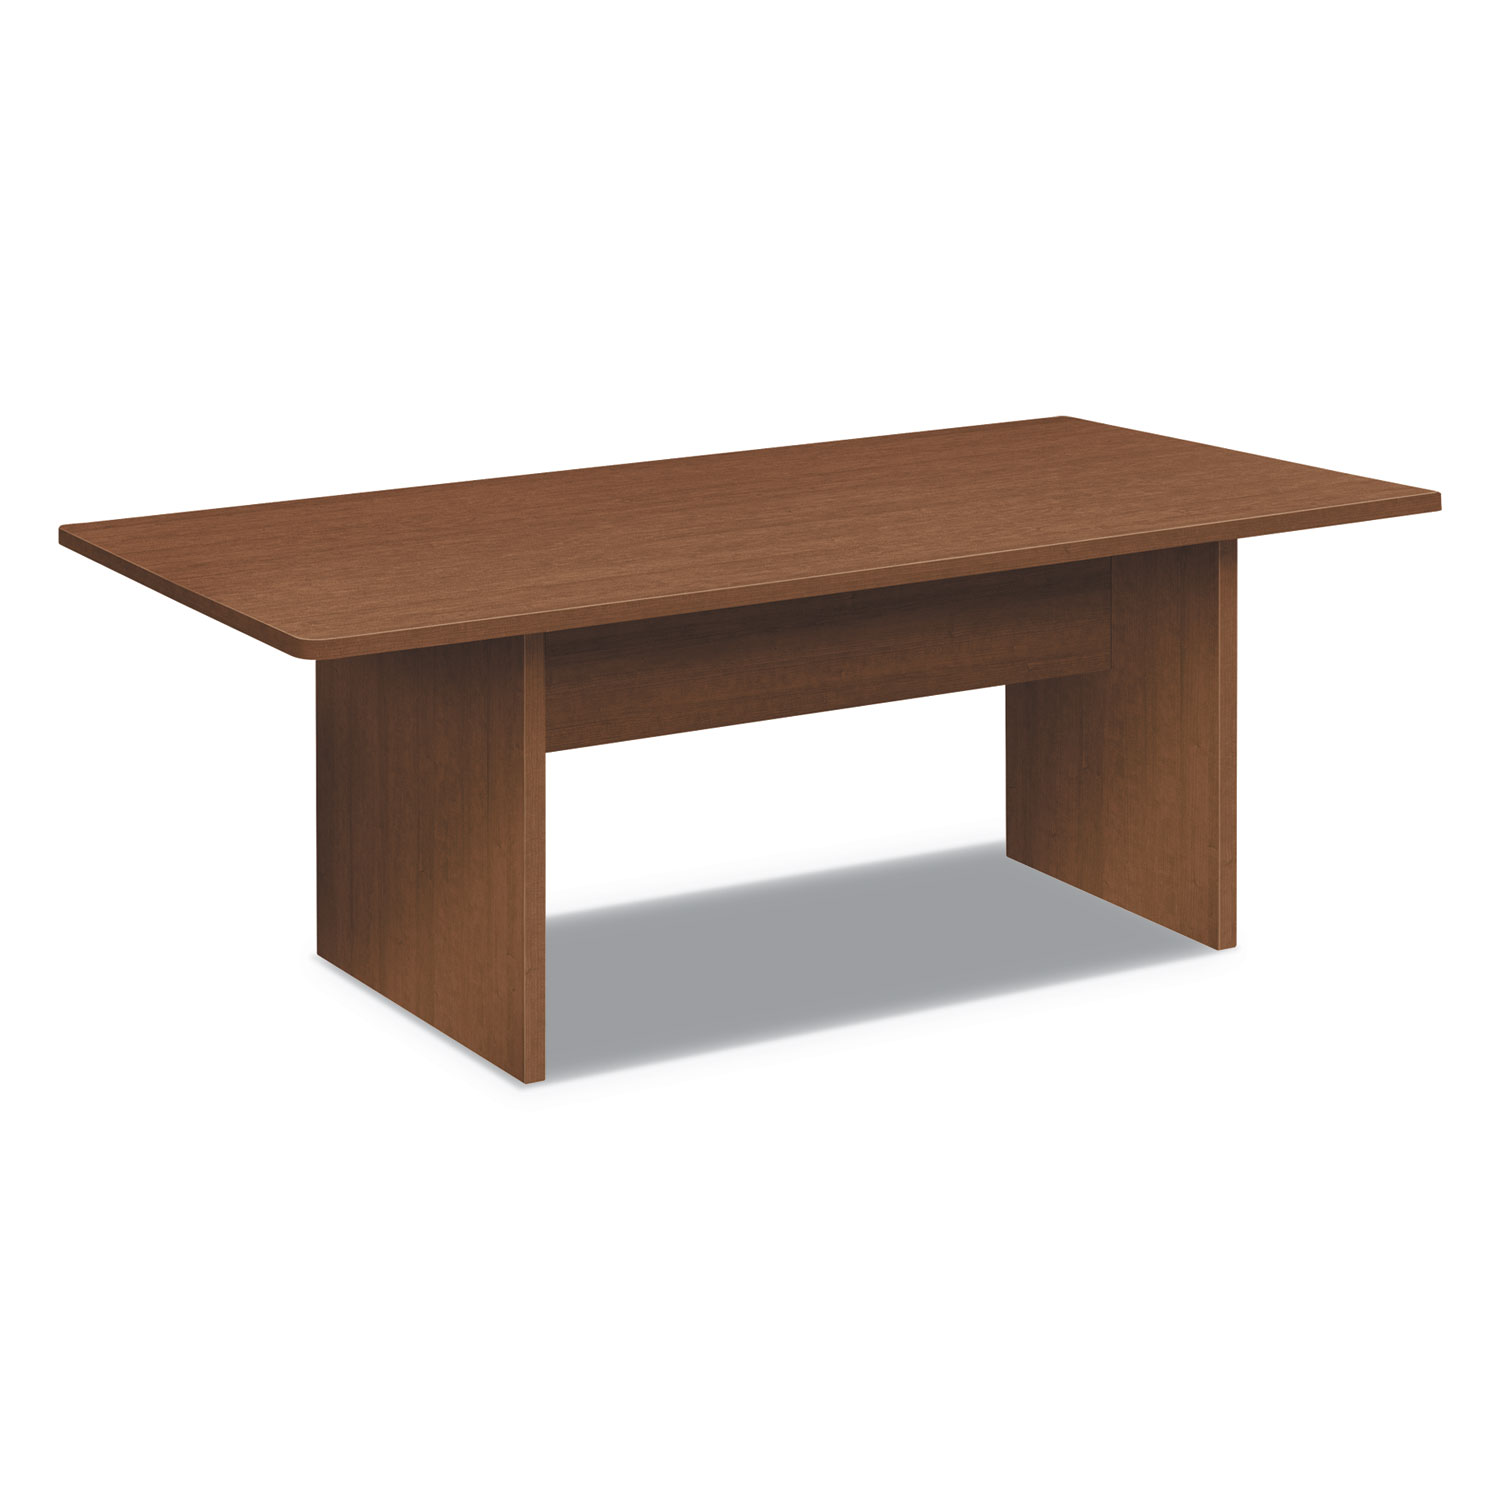 Foundation Rectangular Conference Table, 72w x 36d x 29 1/2h, Shaker Cherry